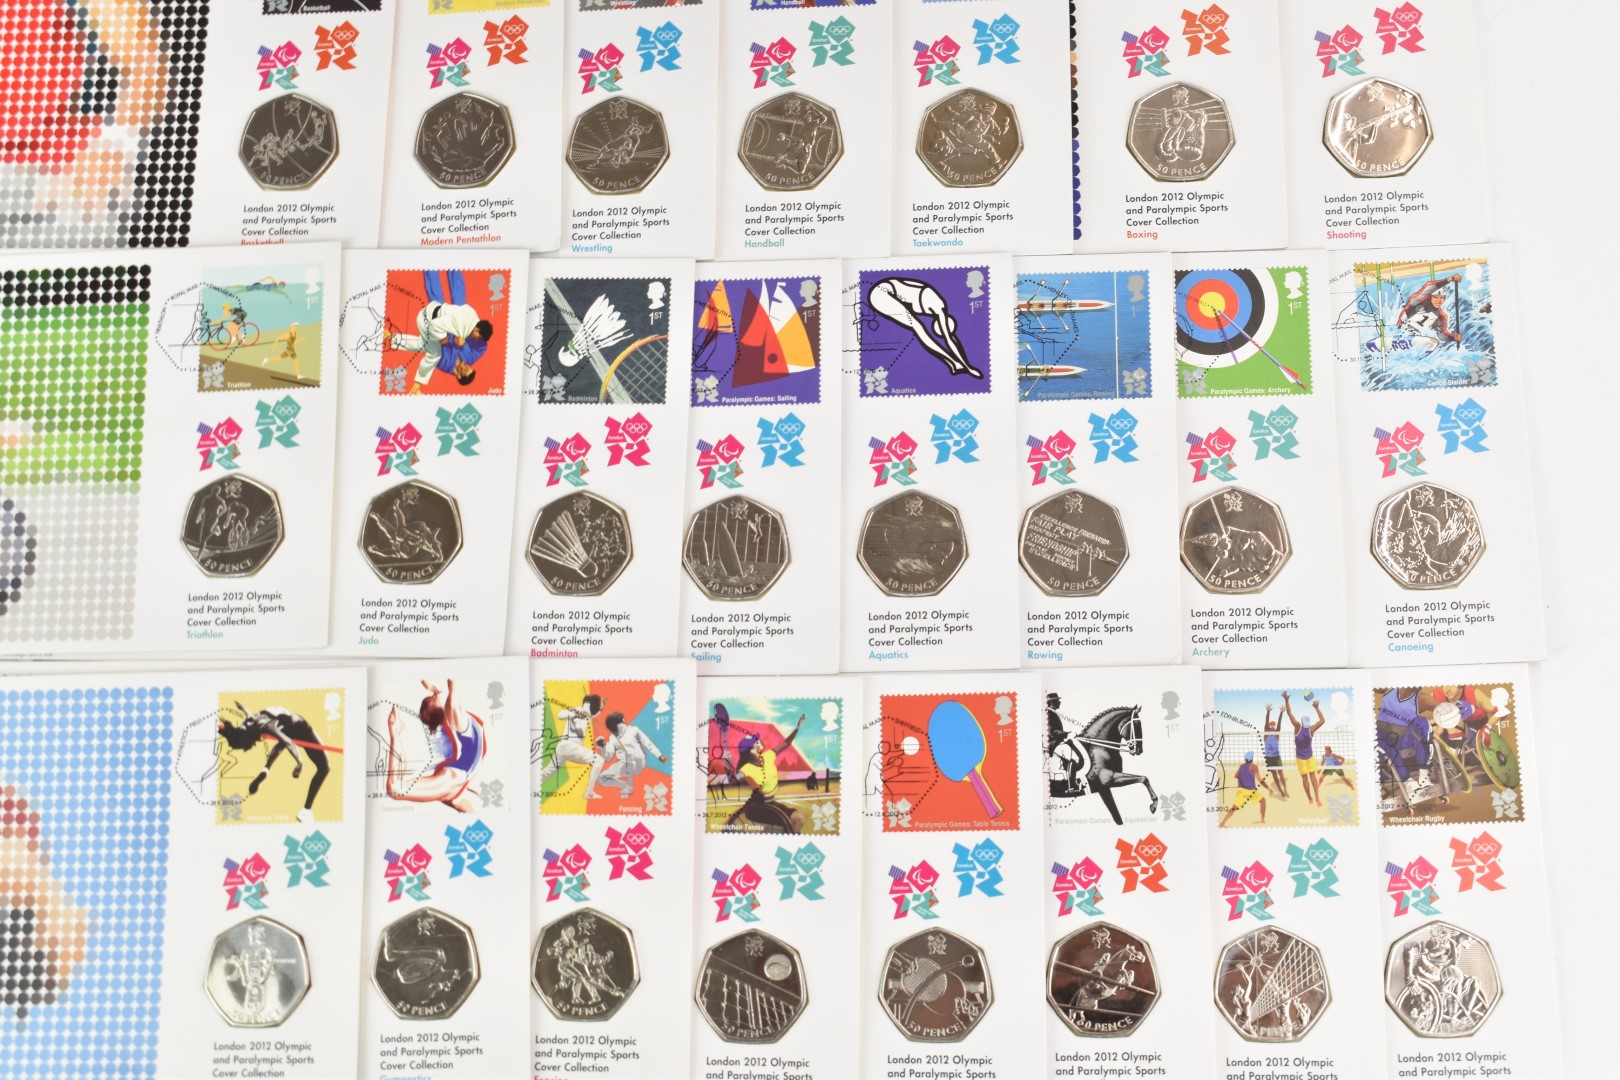 A boxed limited edition of thirty, 2012 Olympic 50p coin and stamp cover, issued by Royal Mail - Image 3 of 3